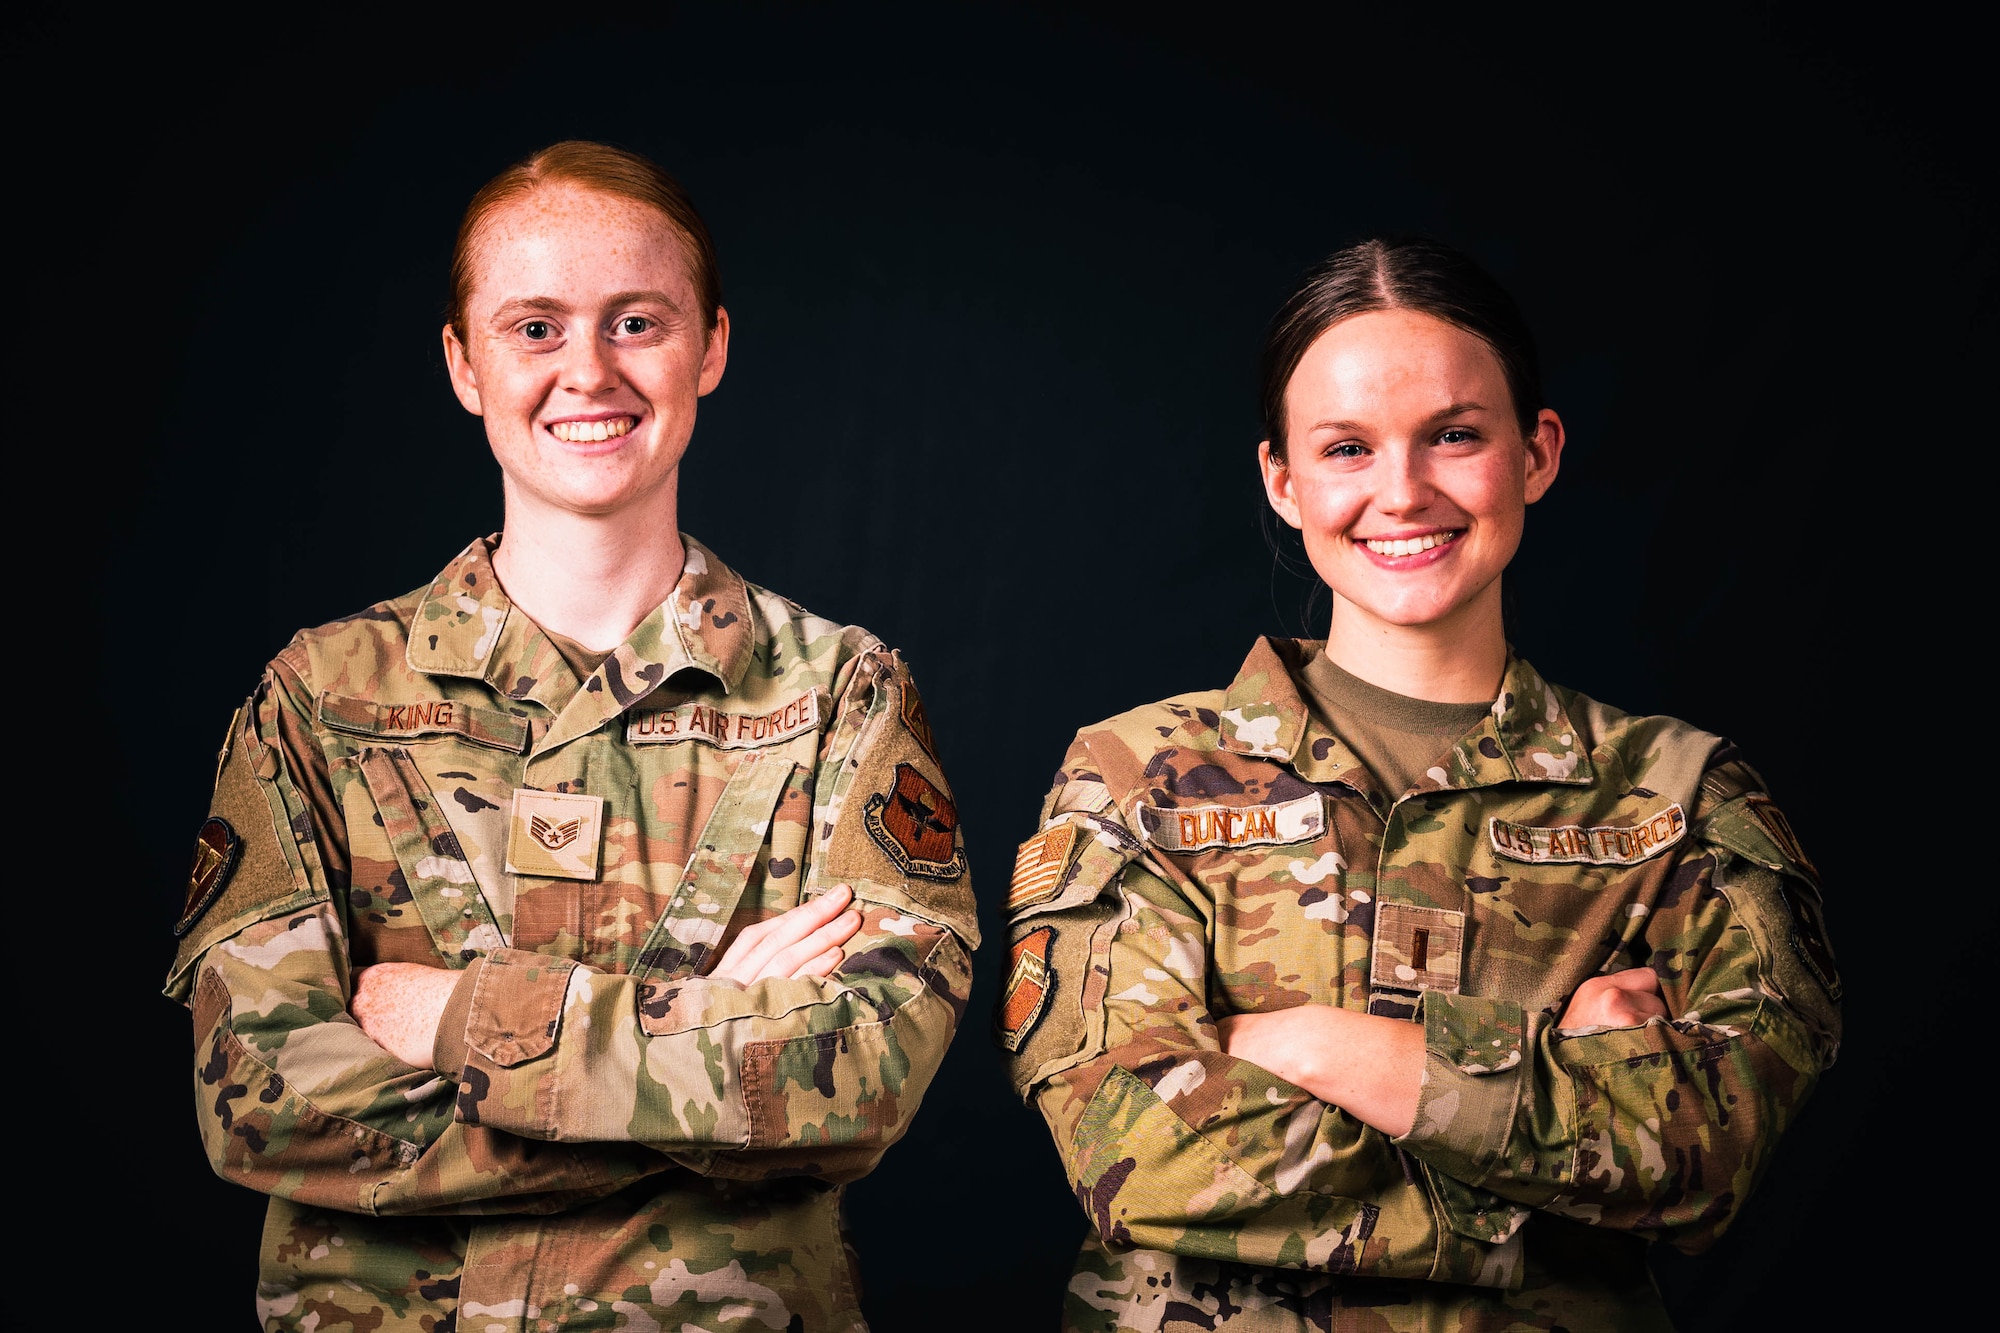 U.S. Air Force Staff Sgt. McKenzie King, 56th Equipment Maintenance Squadron aerospace ground equipment non-commissioned officer and Air Education Training Command’s initiative Torch Athena lead volunteer coordinator (left), 2nd Lt. Abbey Duncan, 56th Fighter Wing public affairs officer (right), pose for a photo for a photo.